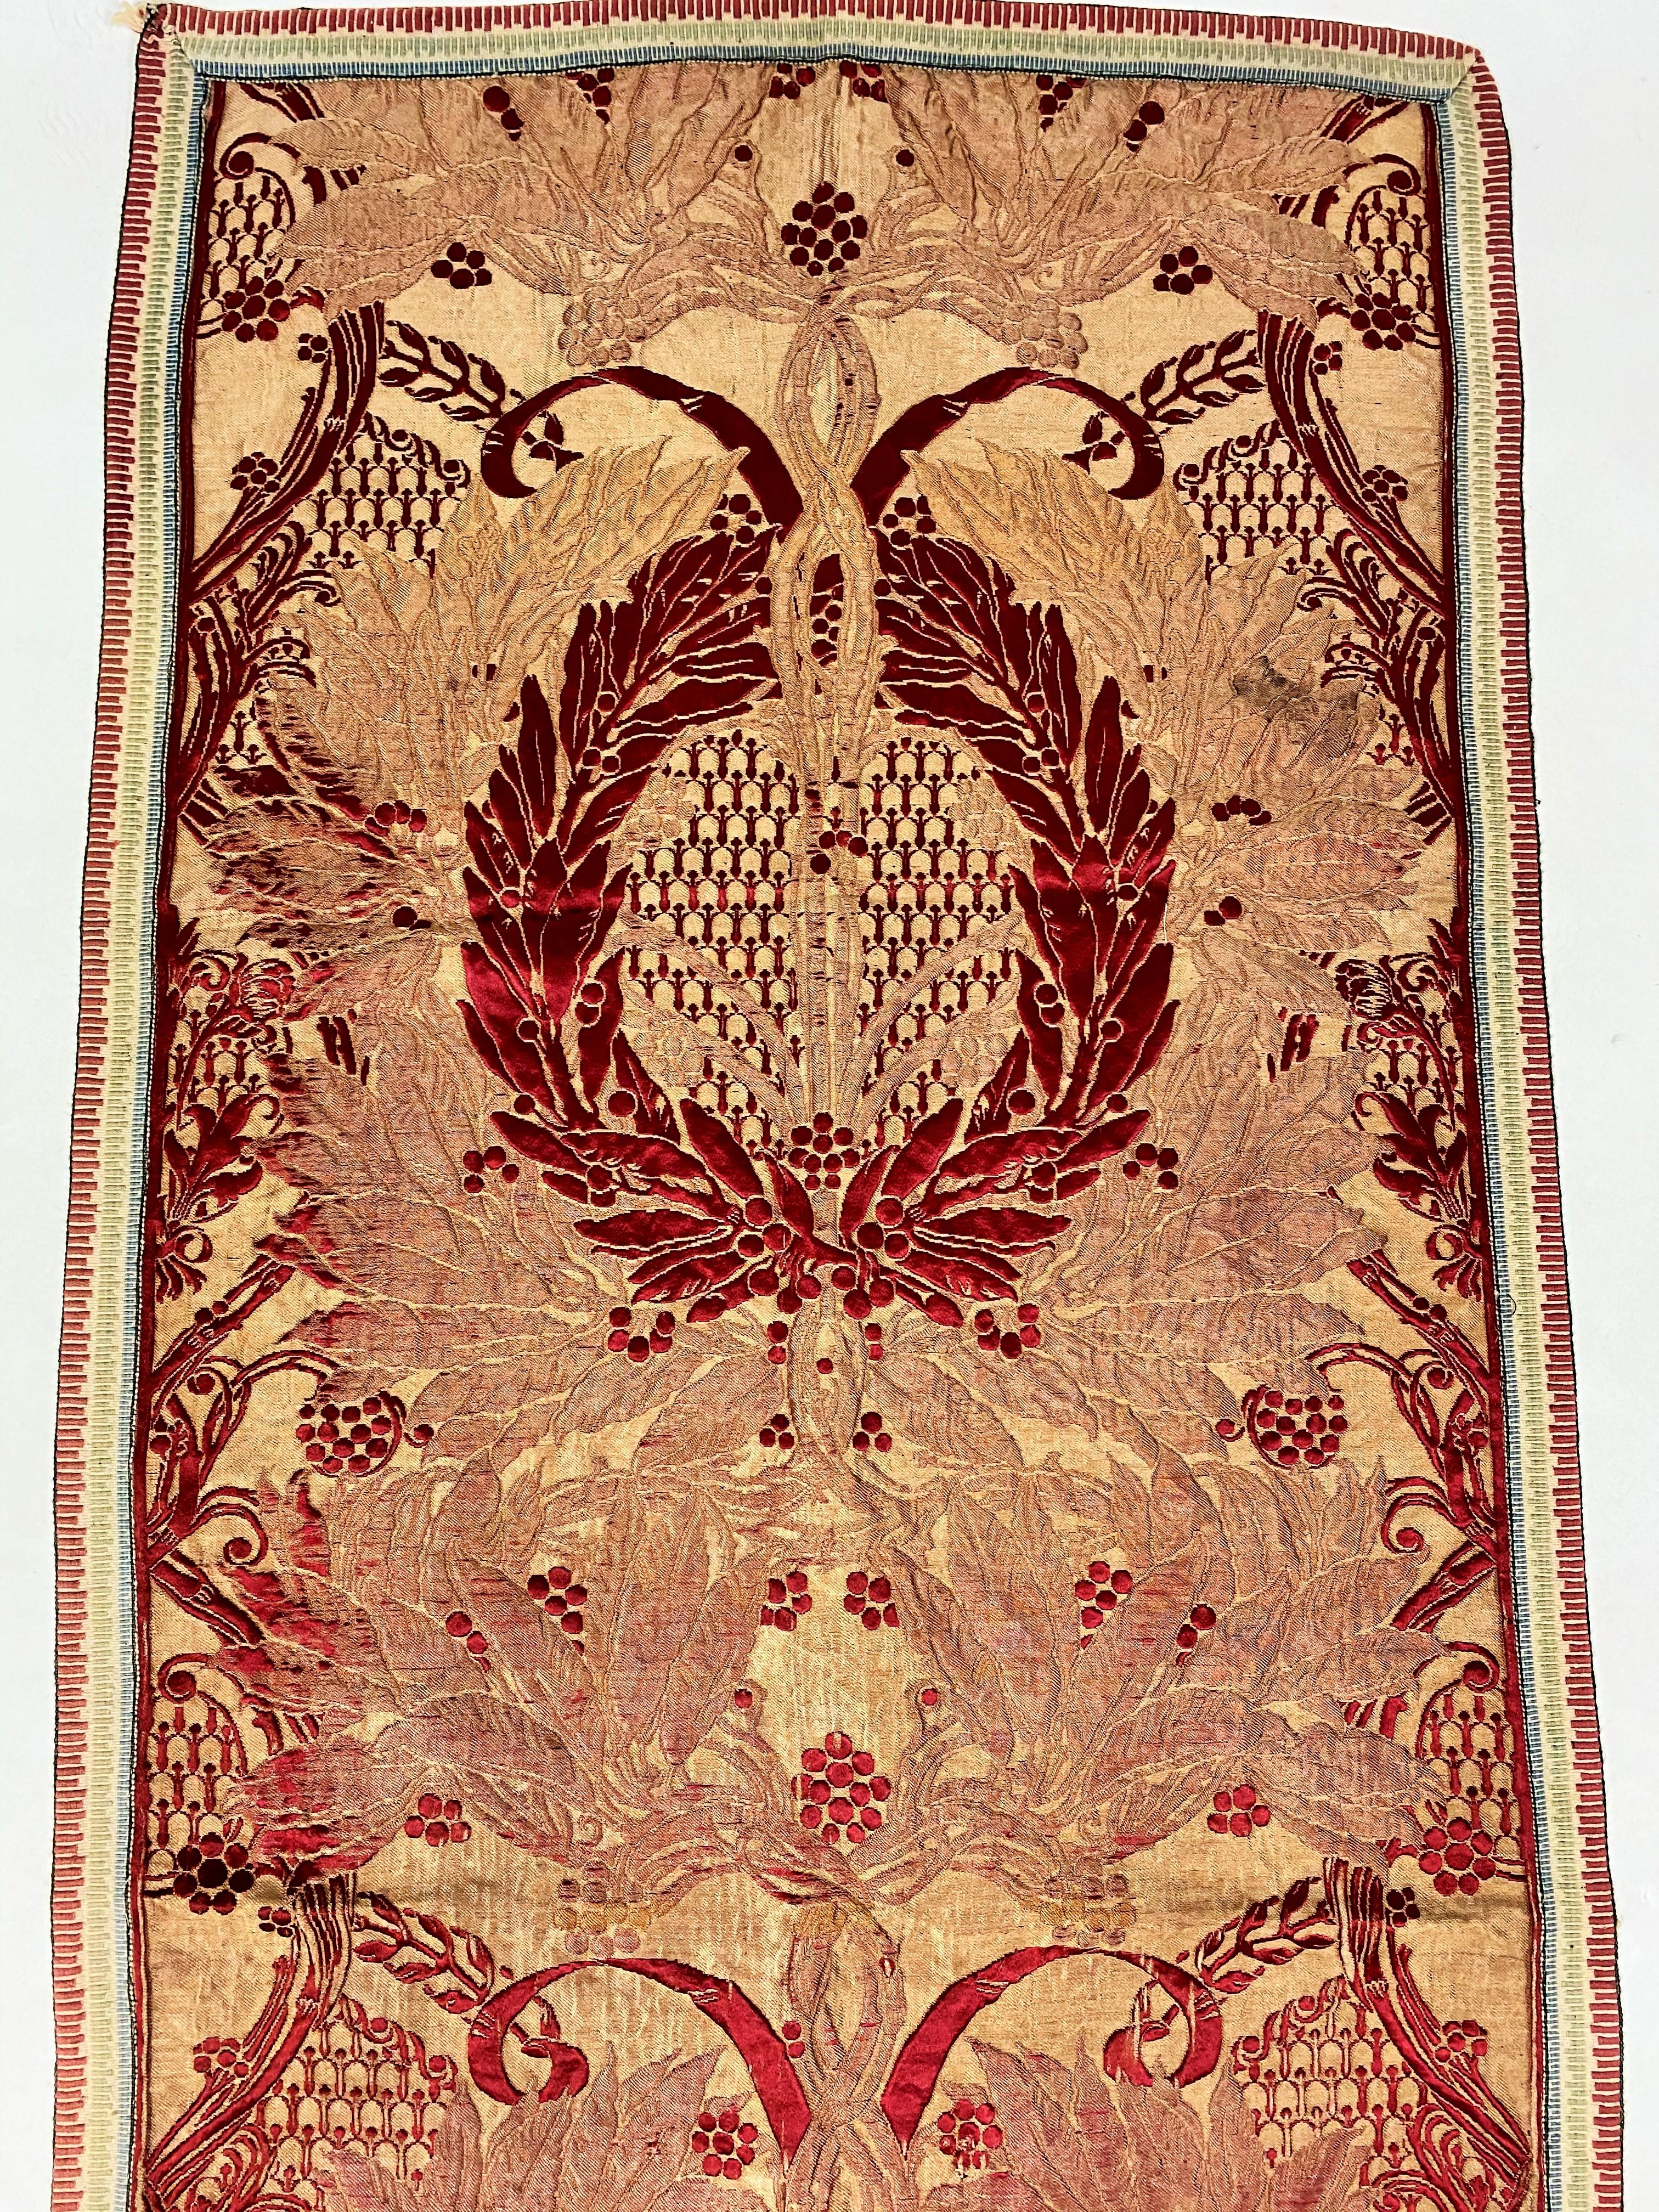 Brown A French Art Nouveau Brocaded Silk by Adrien Karbowsky - Tassinari & Chatel 1899 For Sale